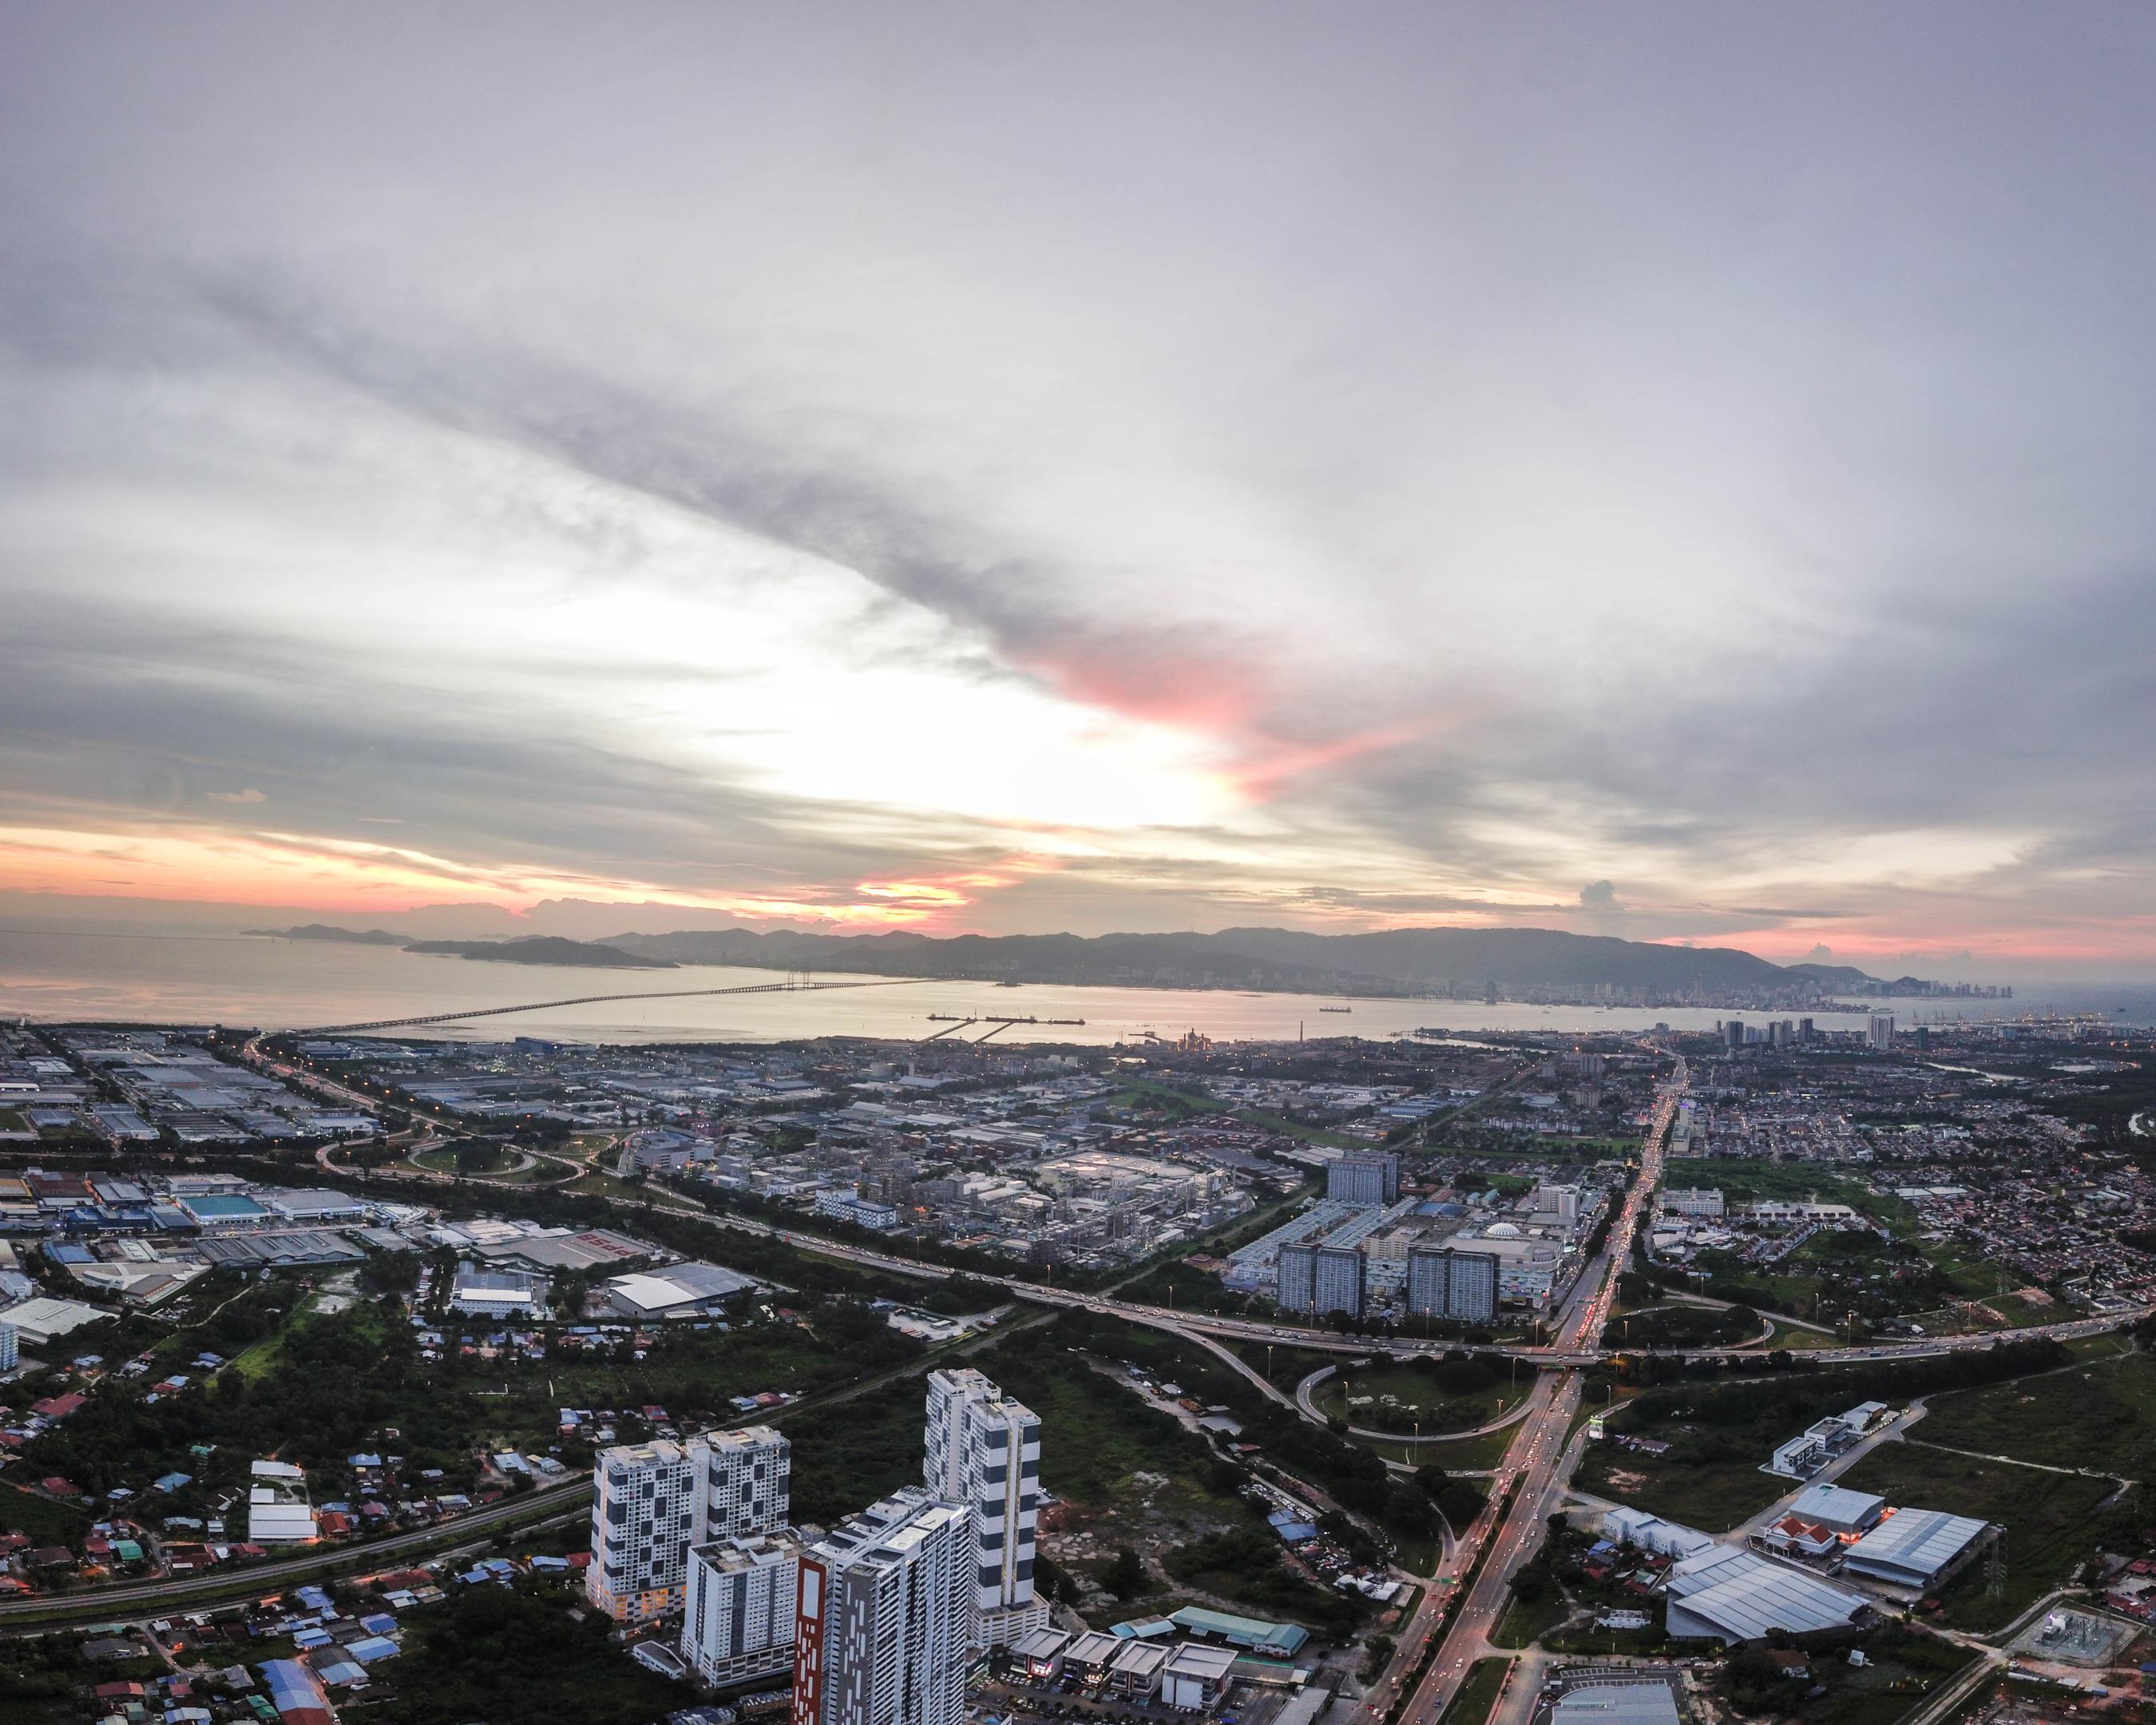 Penang Mainland real estate, building and sea one the picture 